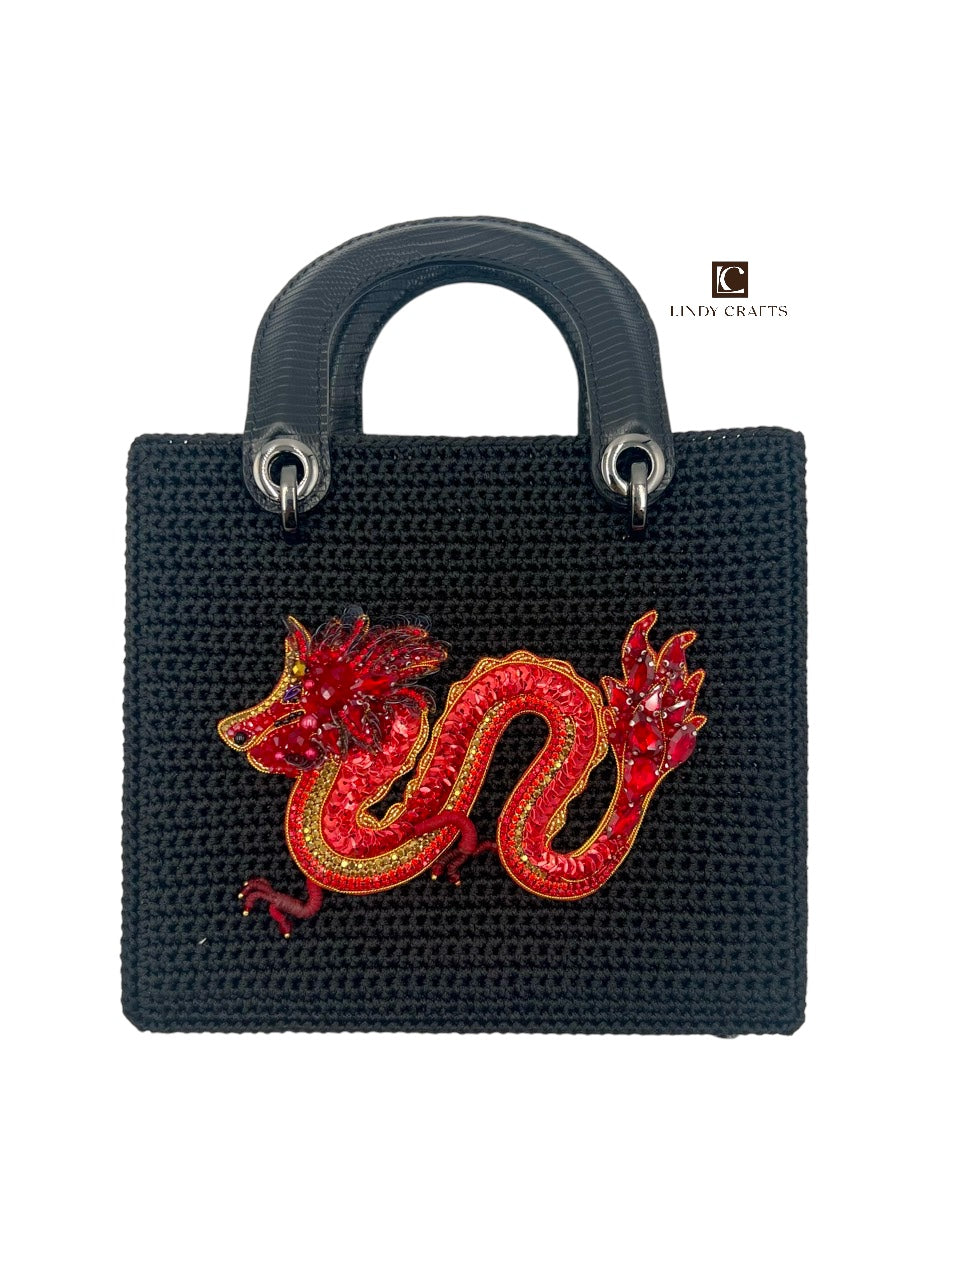 Dragon Bags symbolize strength, power, wealth - a relaxed dragon